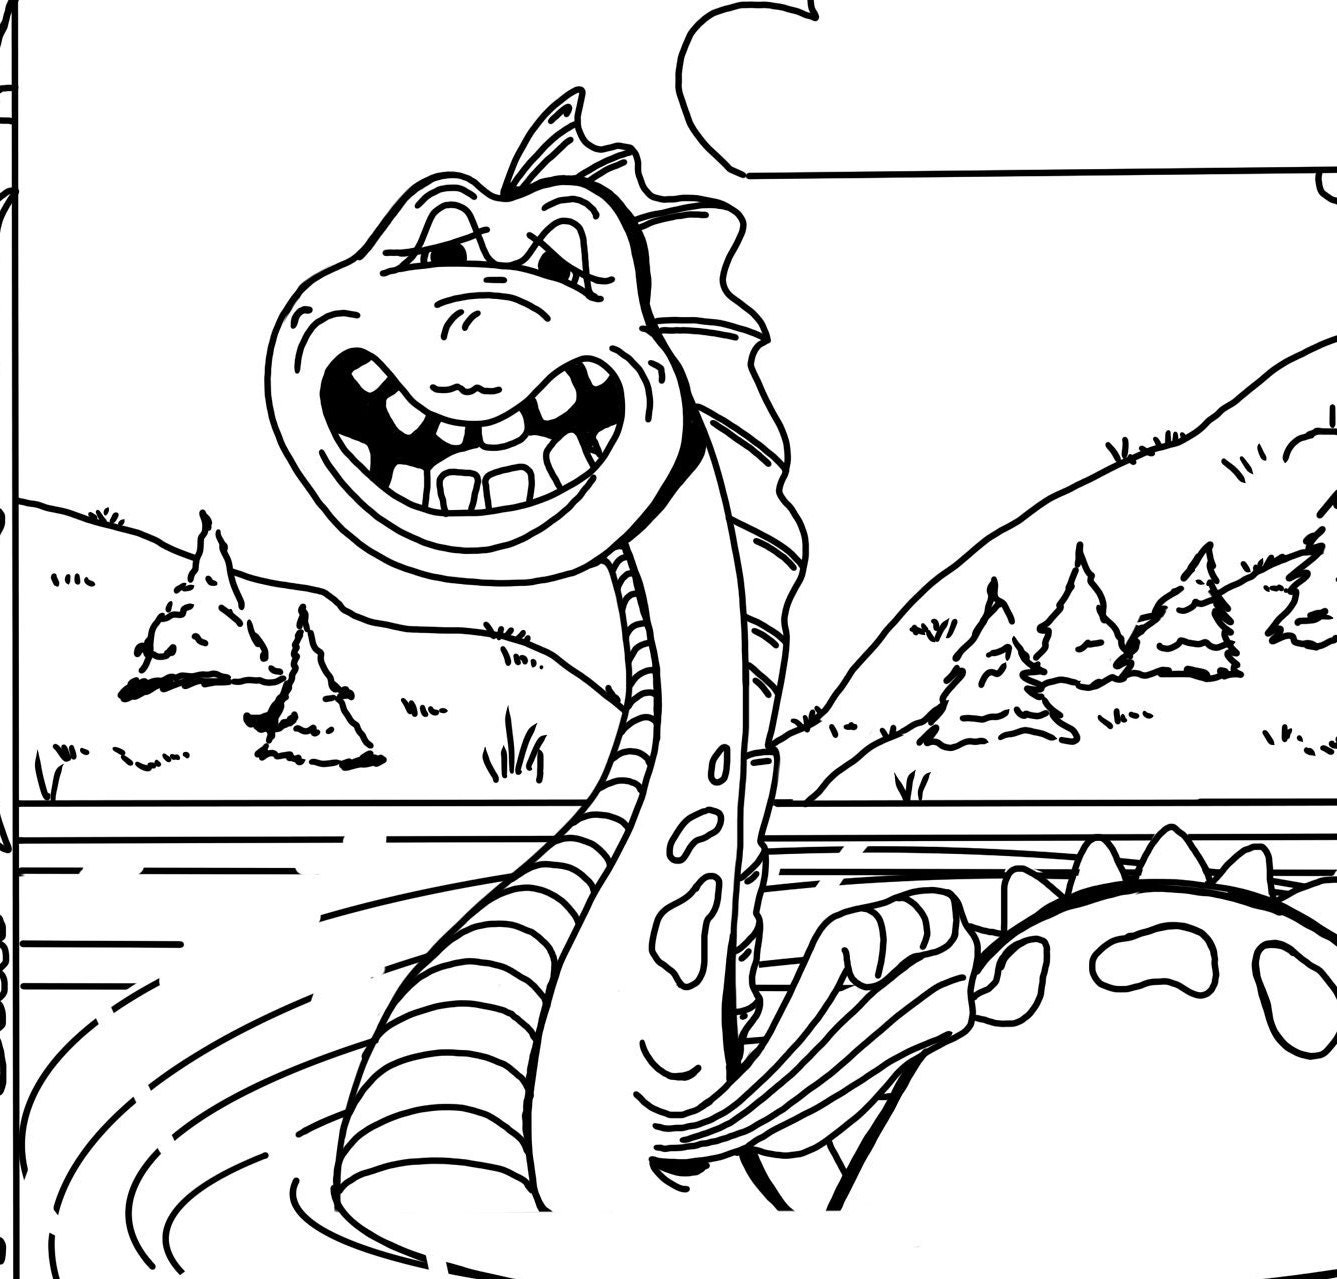 Printable Coloring Page Loch Ness Monster Coloring Sheet - Etsy